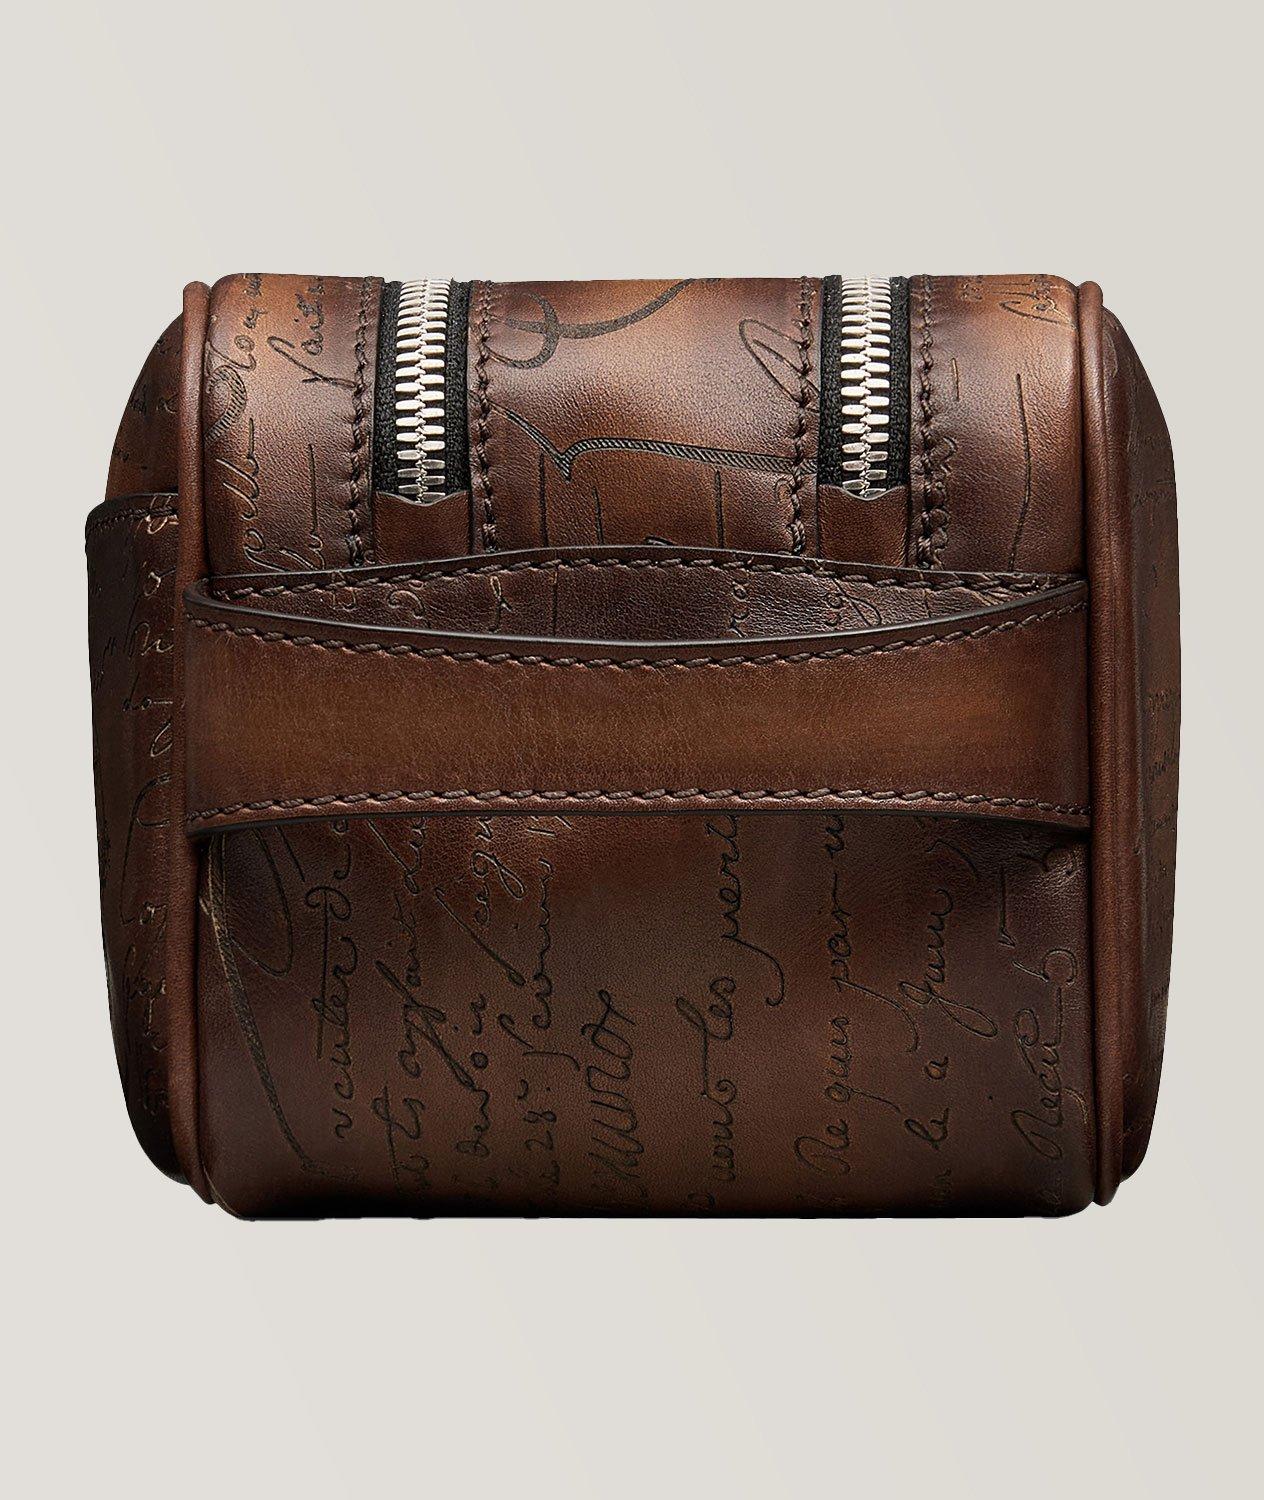 Formula Scritto Leather Toiletry Bag image 3